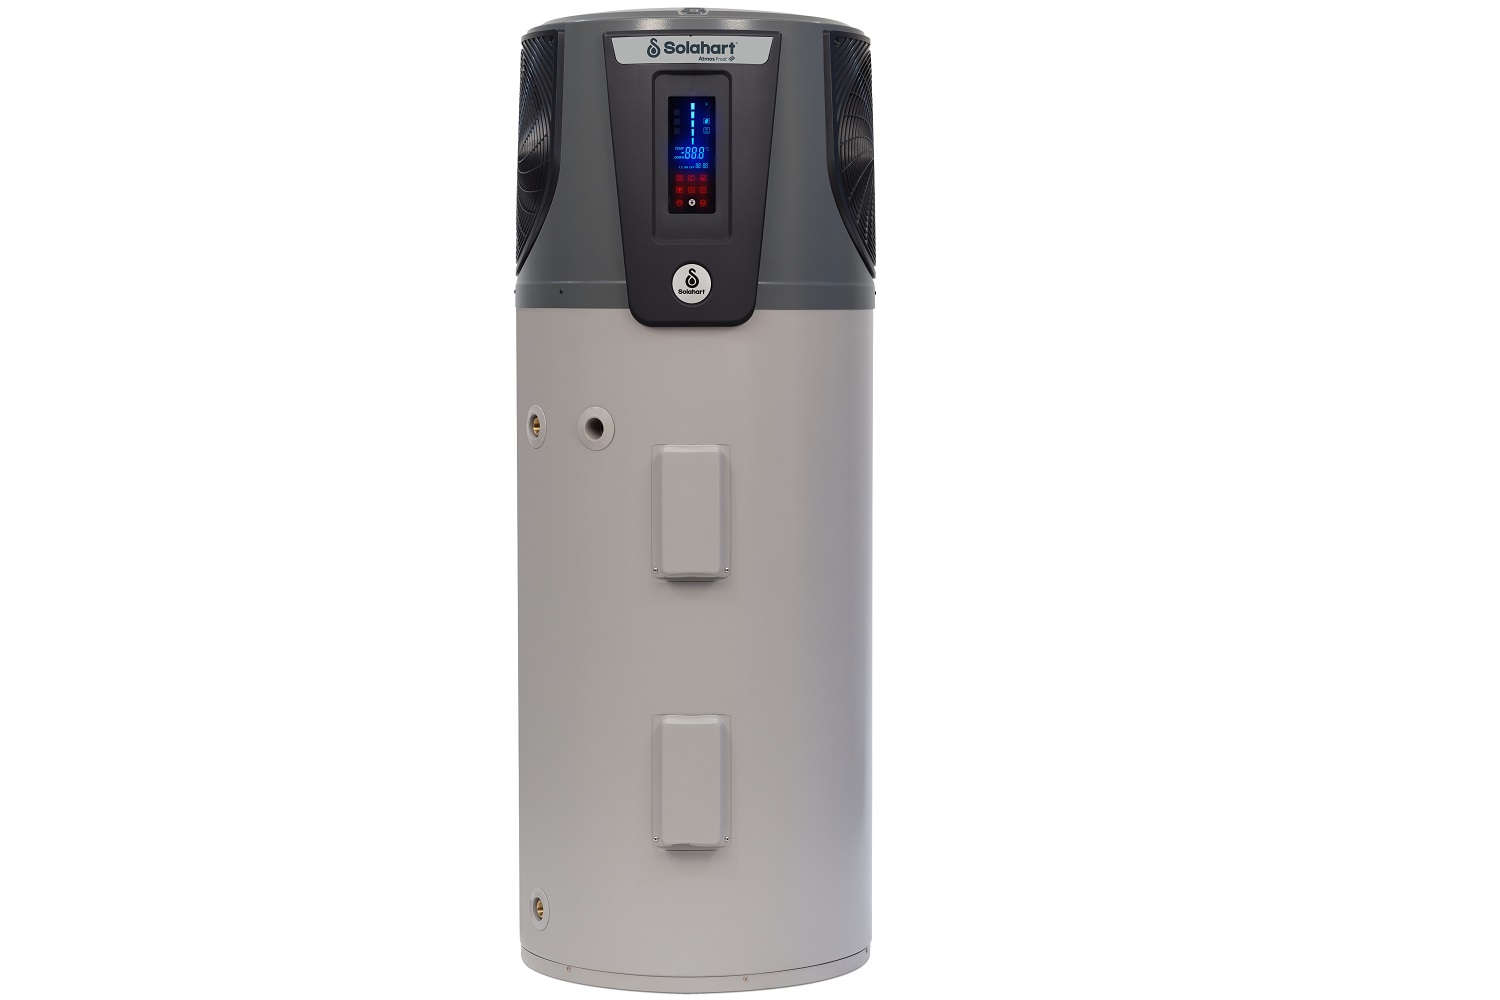 Solahart Atmos Frost heat pump hot water heater available from Orange Electrical Works - front 